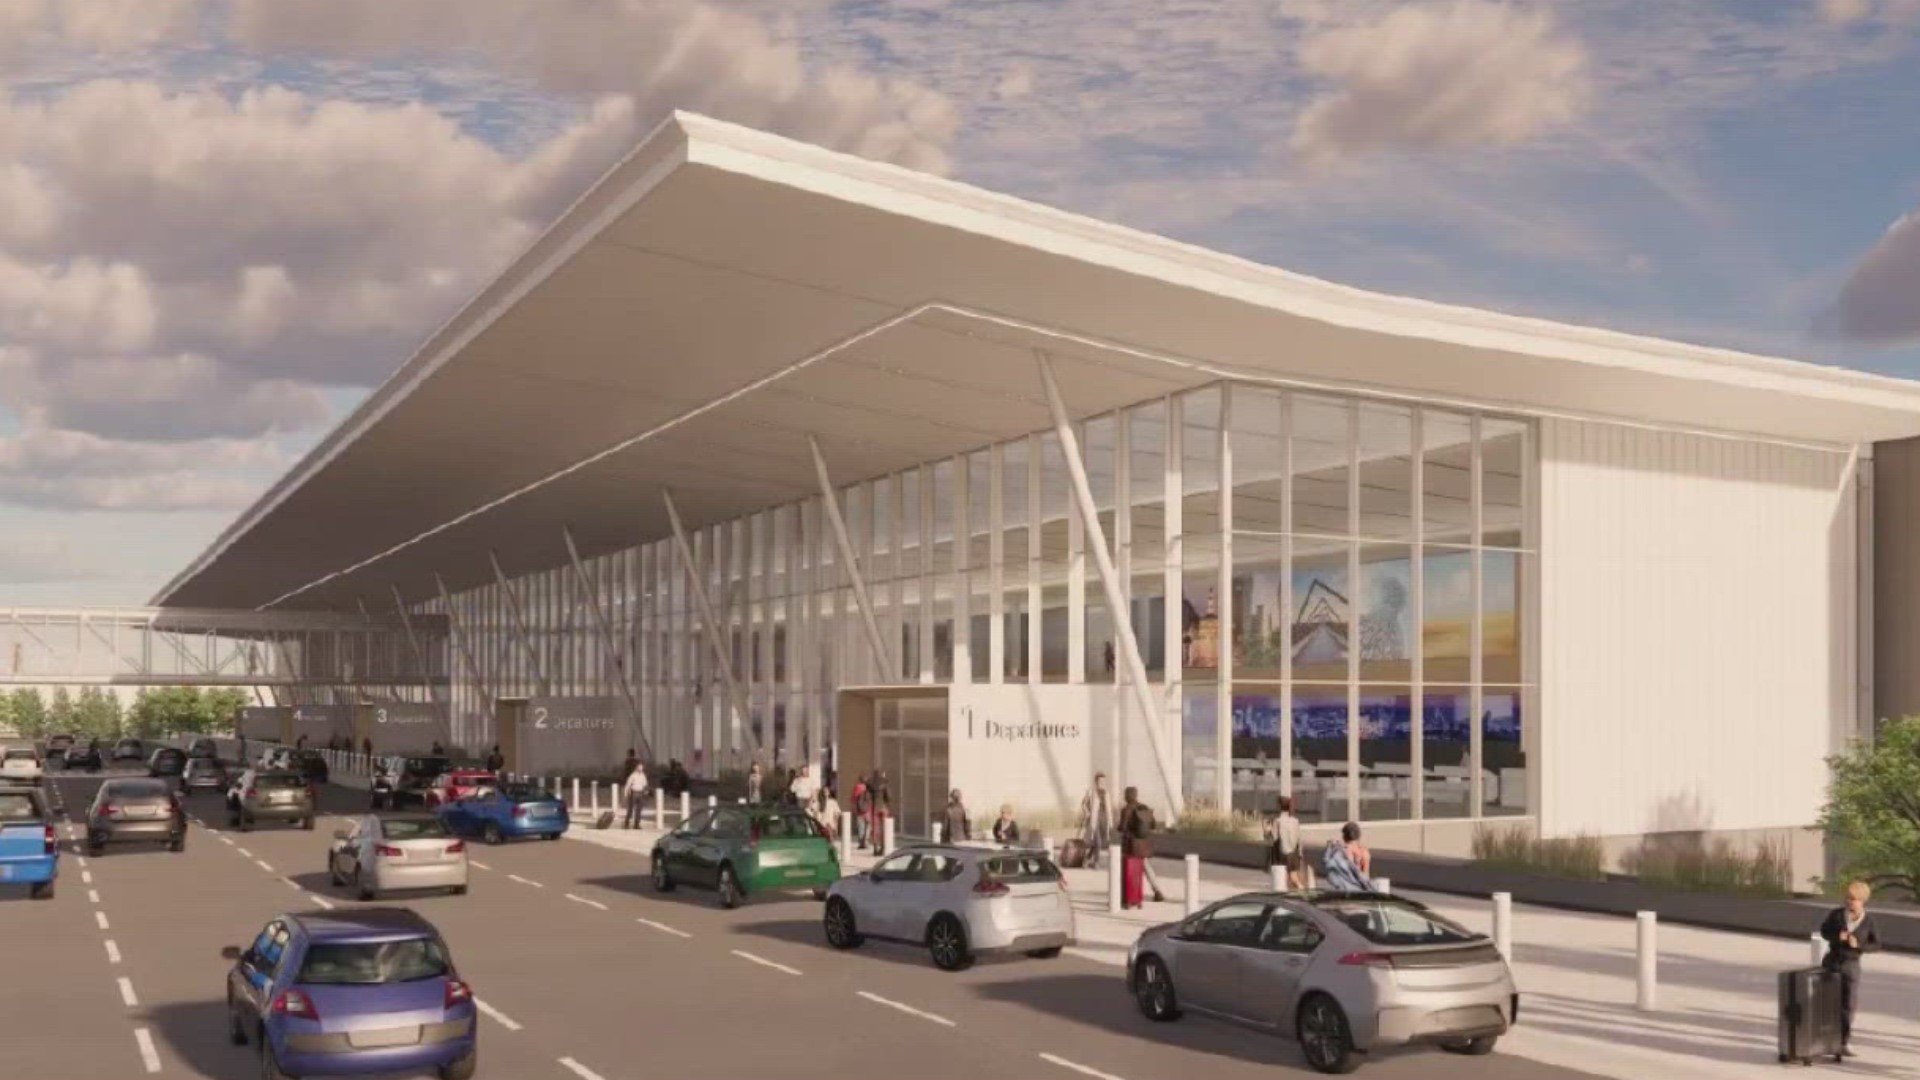 The airport overhaul would add a new terminal and administration building to the airport's existing footprint.